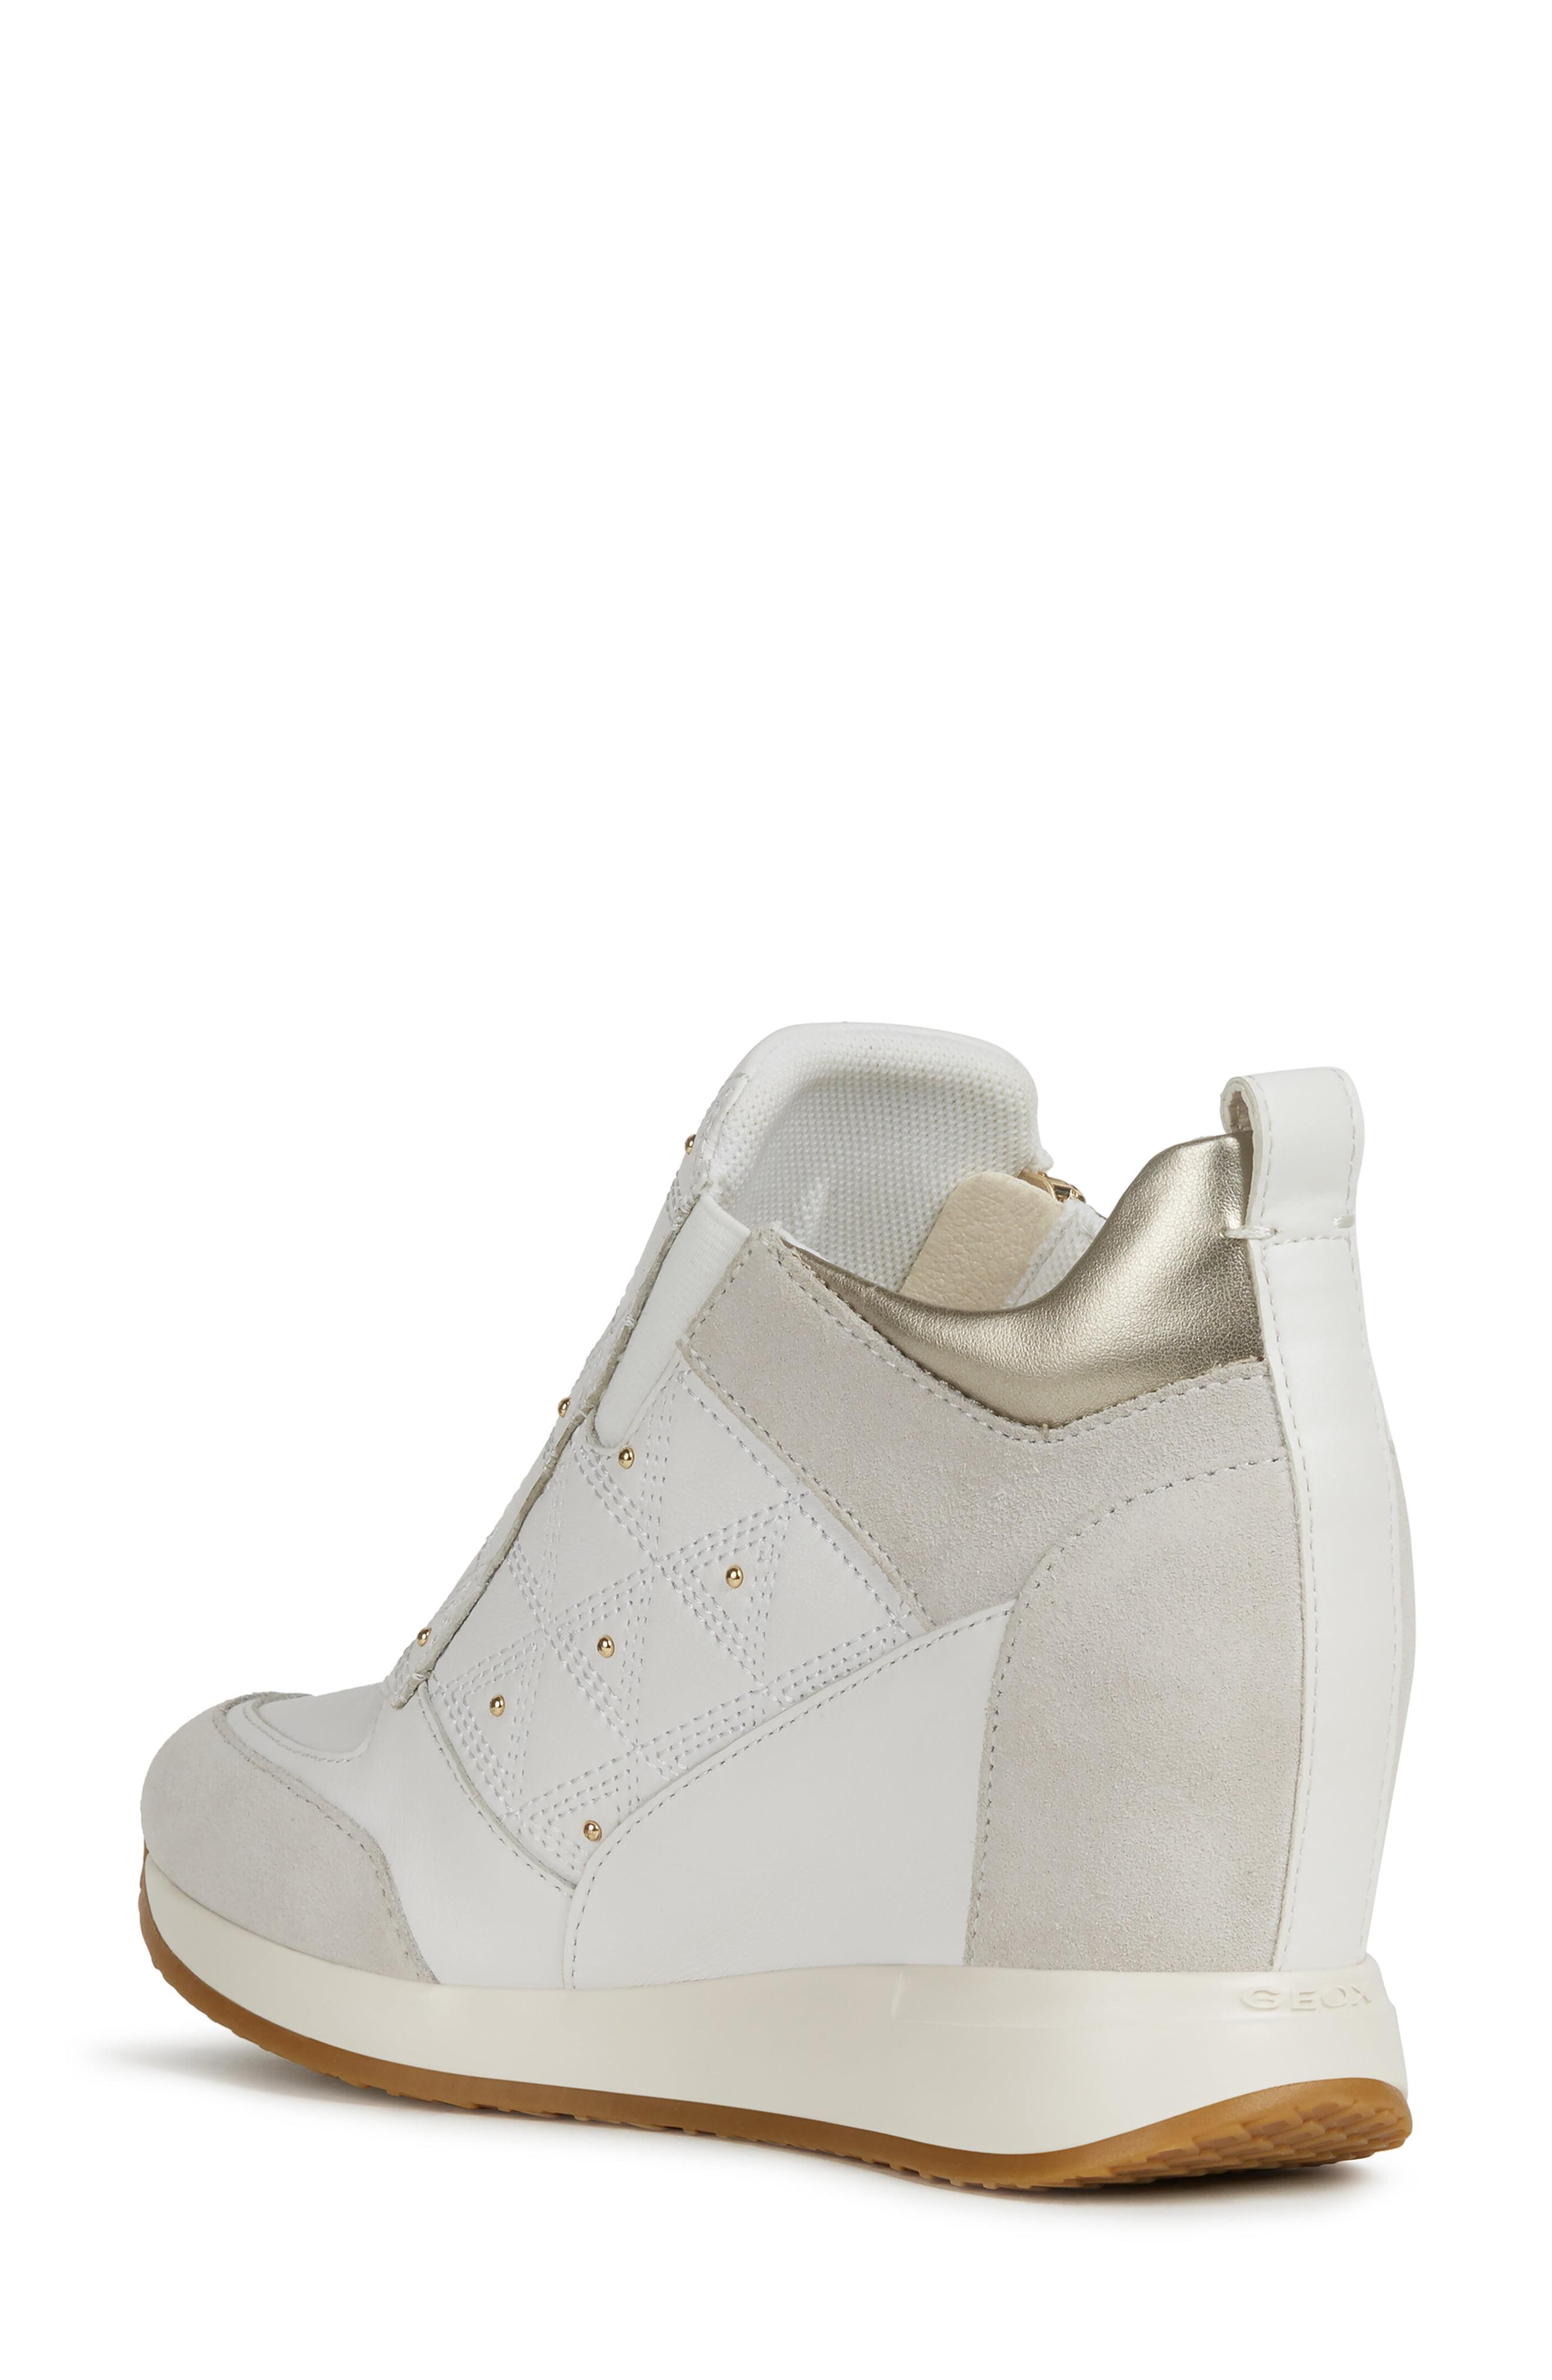 Geox Nydame Wedge Sneaker in White - Lyst